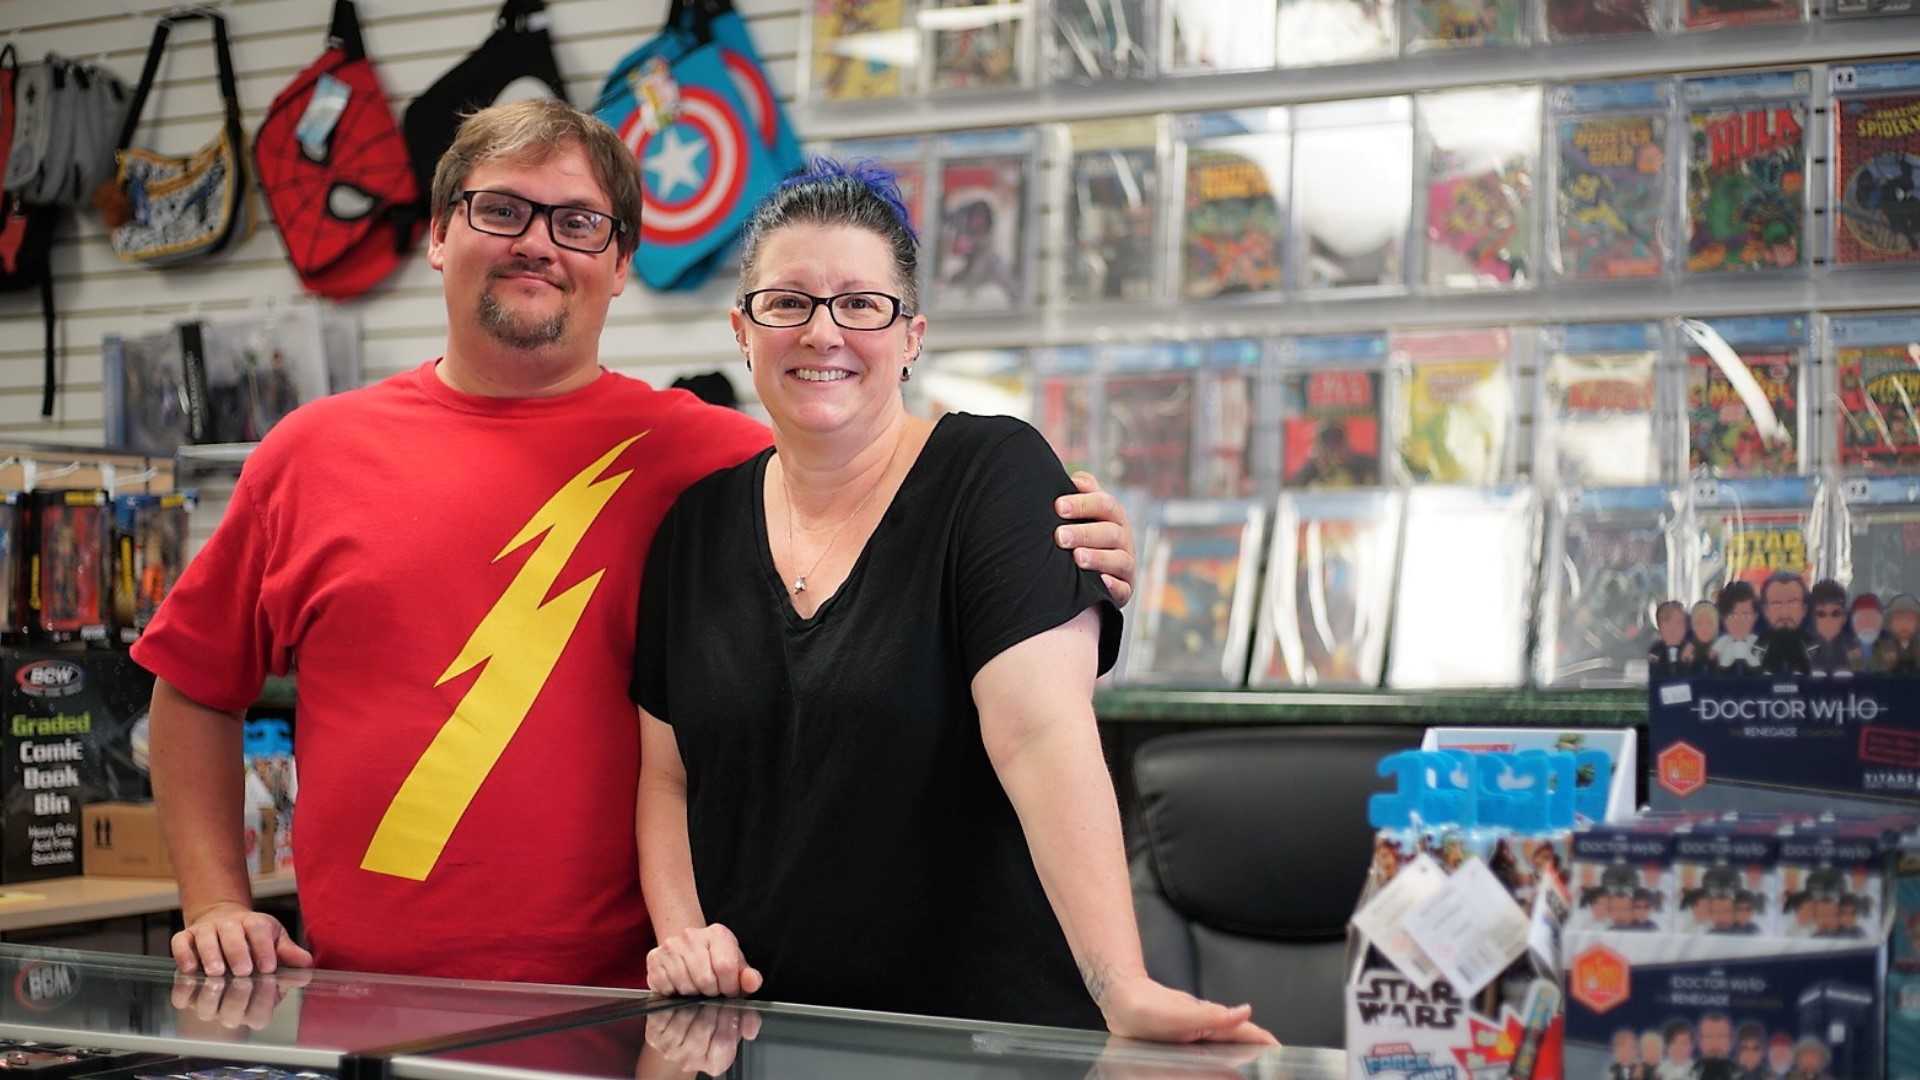 Monique Huffman, co-owner of Fanboy Collectibles and Comics says they have comic books from the 1940s.